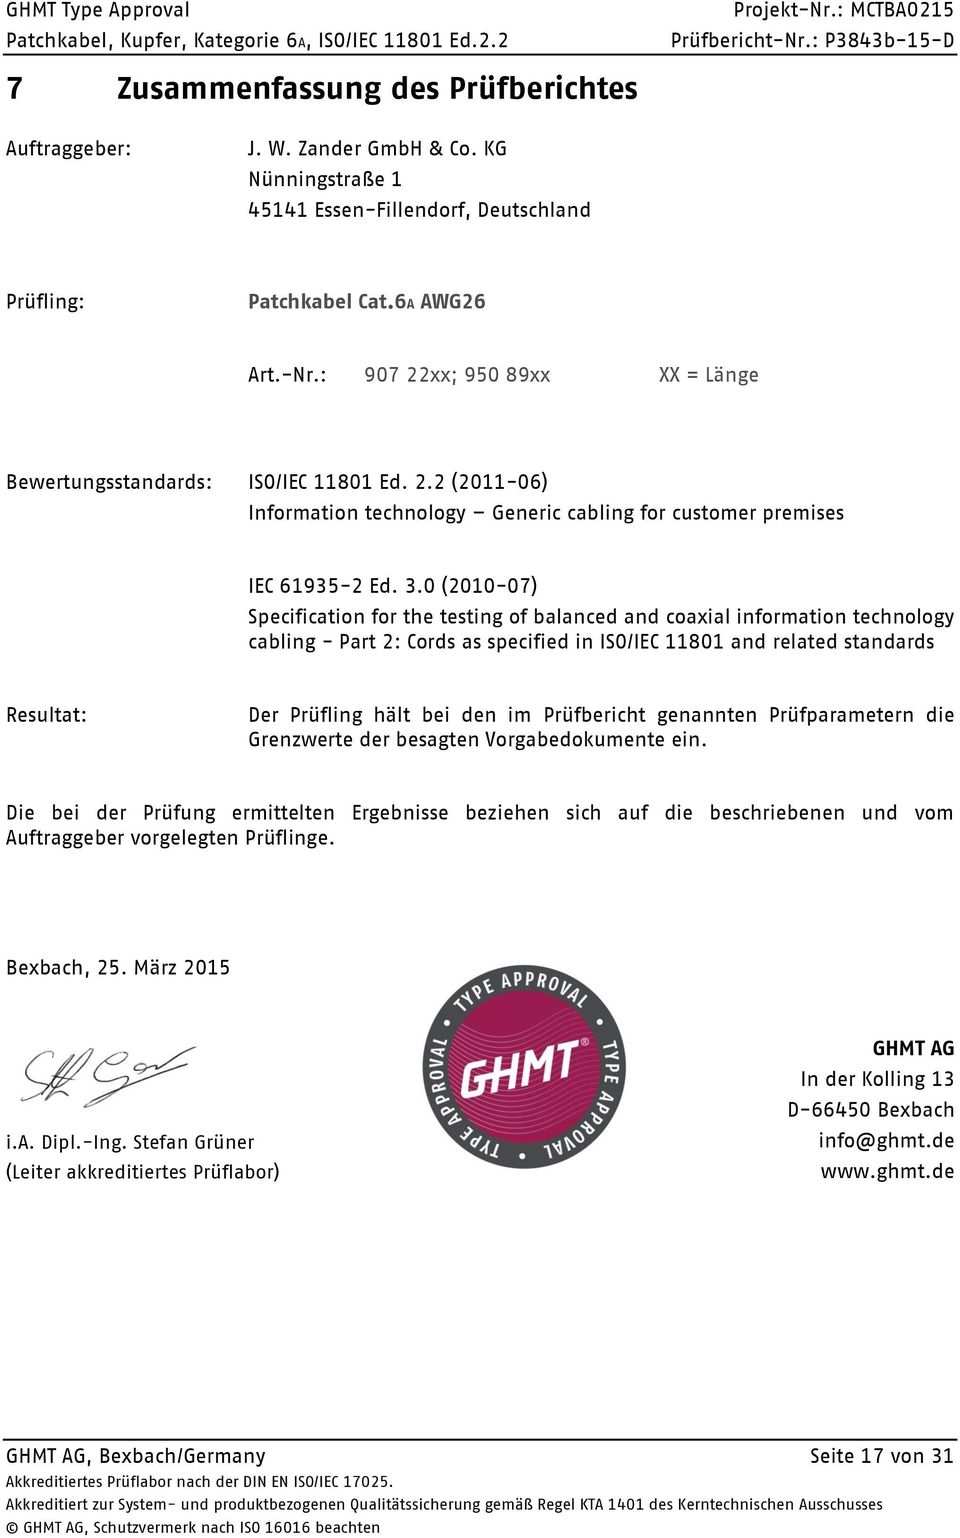 (21-7) Specification for the testing of balanced and coaxial information technology cabling - Part 2: Cords as specified in ISO/IEC 1181 and related standards Resultat: Der Prüfling hält bei den im